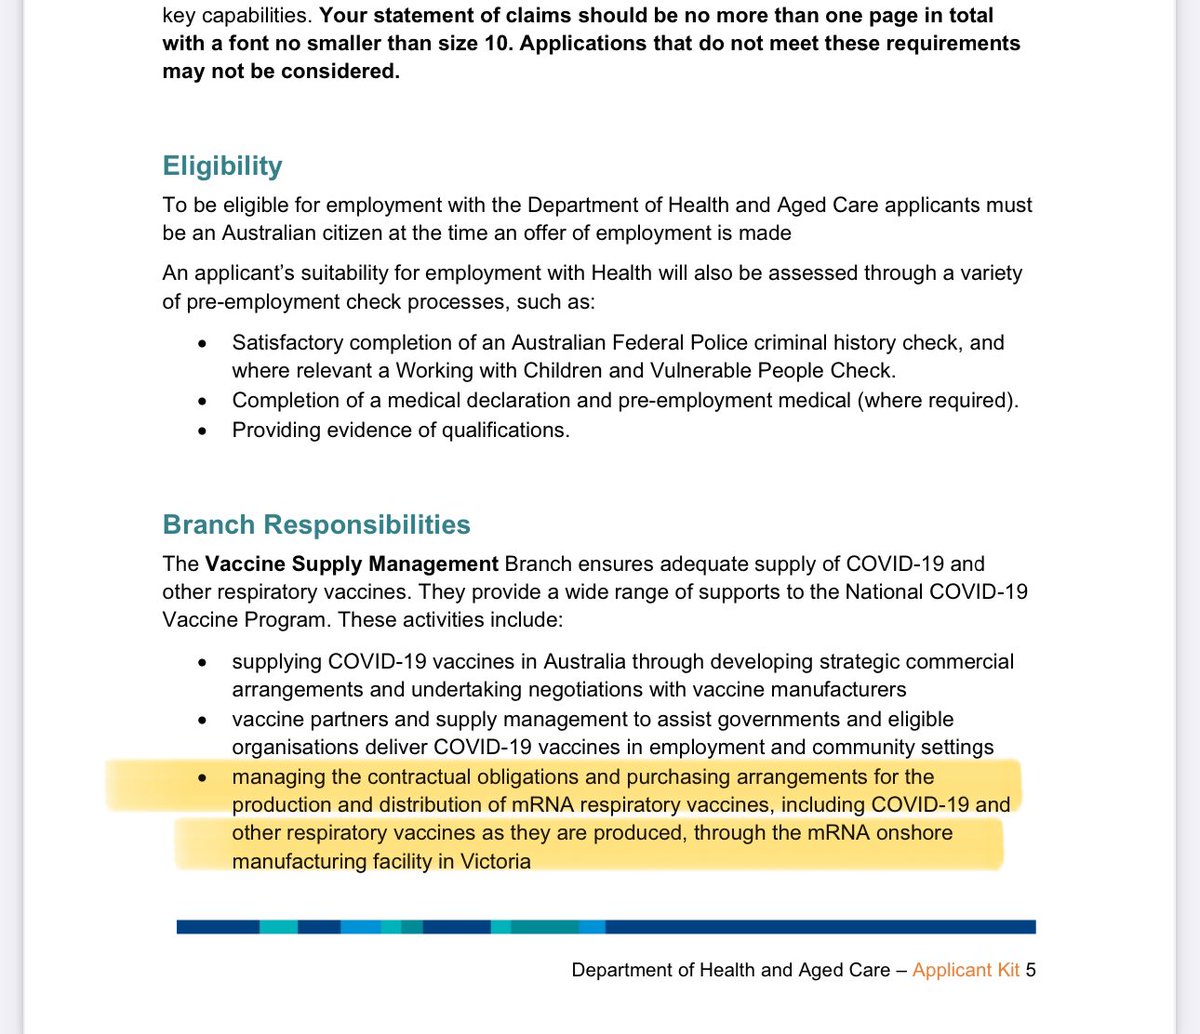 @ausvstheagenda Interesting that the @TGAgovau are recruiting for ‘The National Covid-19 Vaccine Program’. Responsibilities include managing the contractual and purchasing arrangements for the Vic site So much for independent regulators.@Jikkyleaks @real_GGoswami healthjobs.nga.net.au/publicfiles/he…